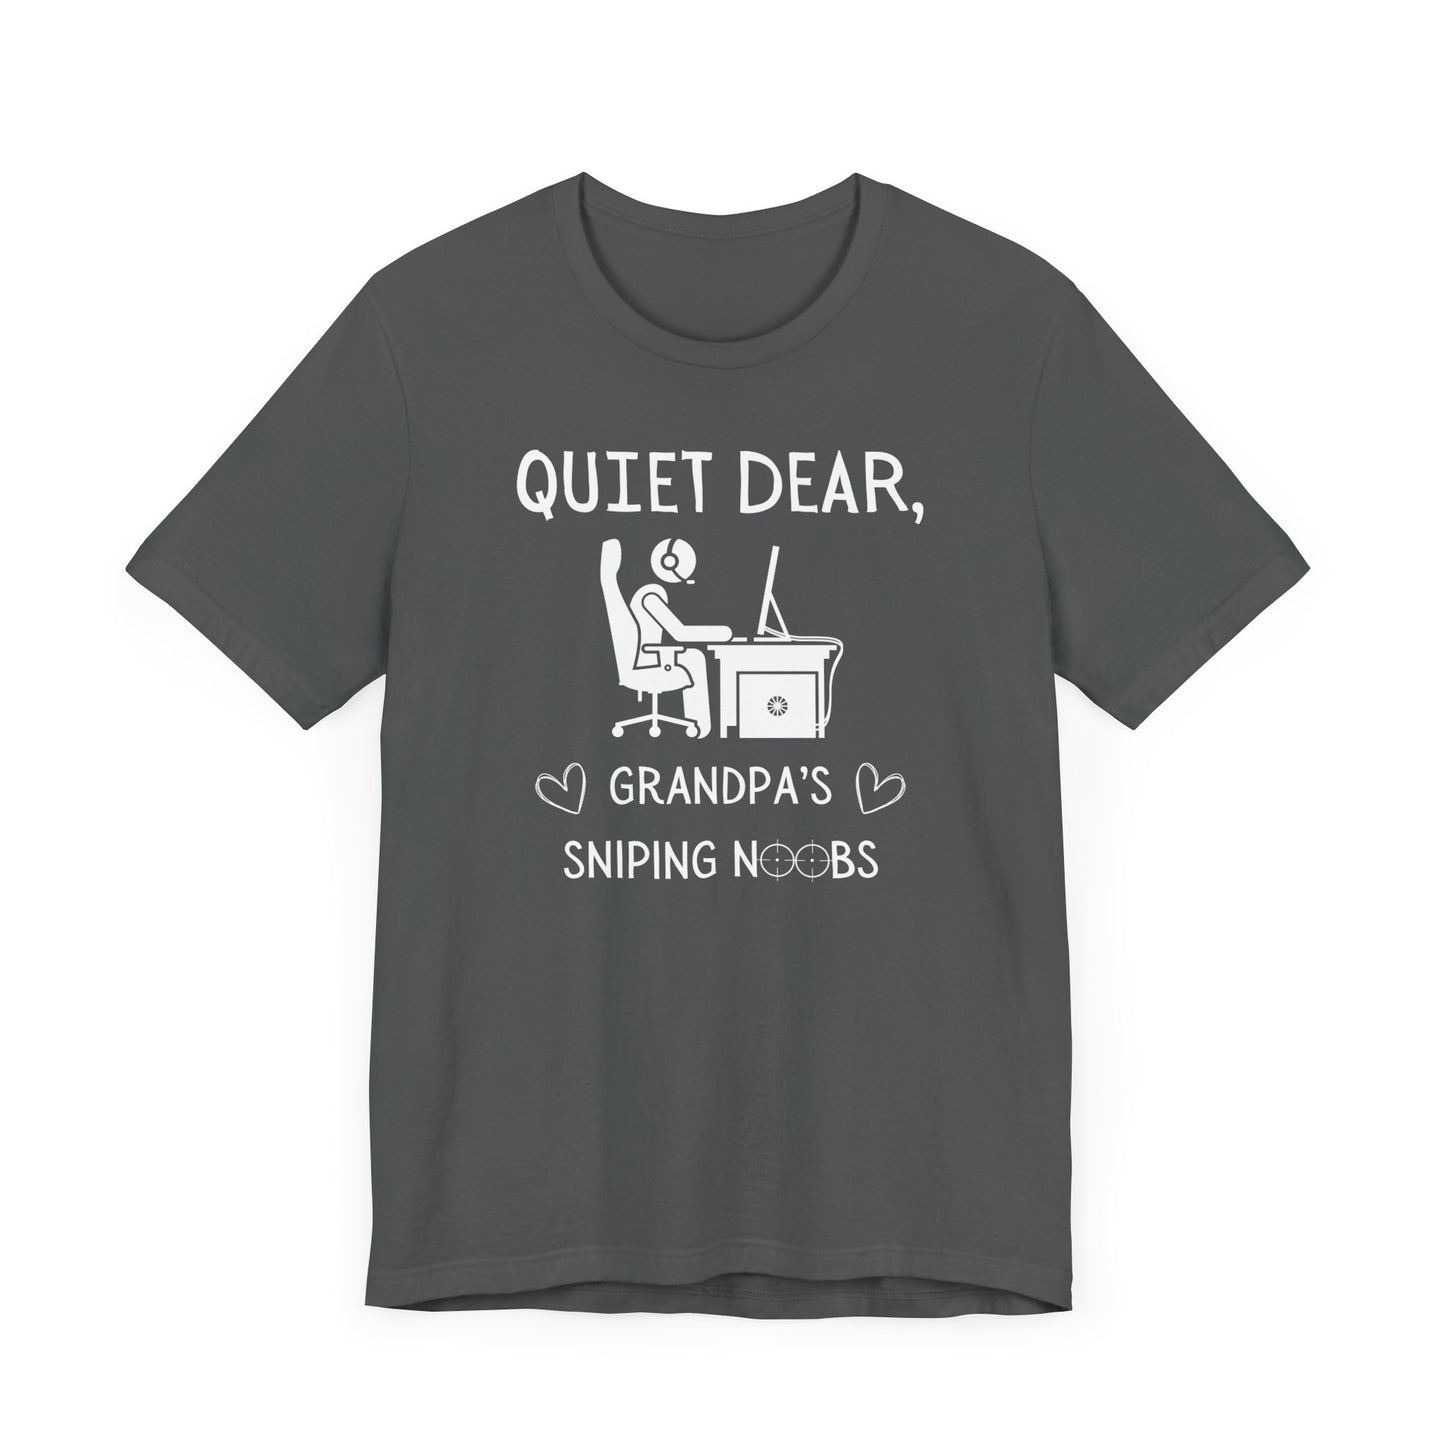 A flat image of a gray t-shirt that reads Quiet Dear, Grandpa's Sniping Noobs in white text. The lower text is framed by two hearts, and the O's are in the shape of sniper scopes. In the center of the shirt is an image of a person at a desk with a gaming PC.